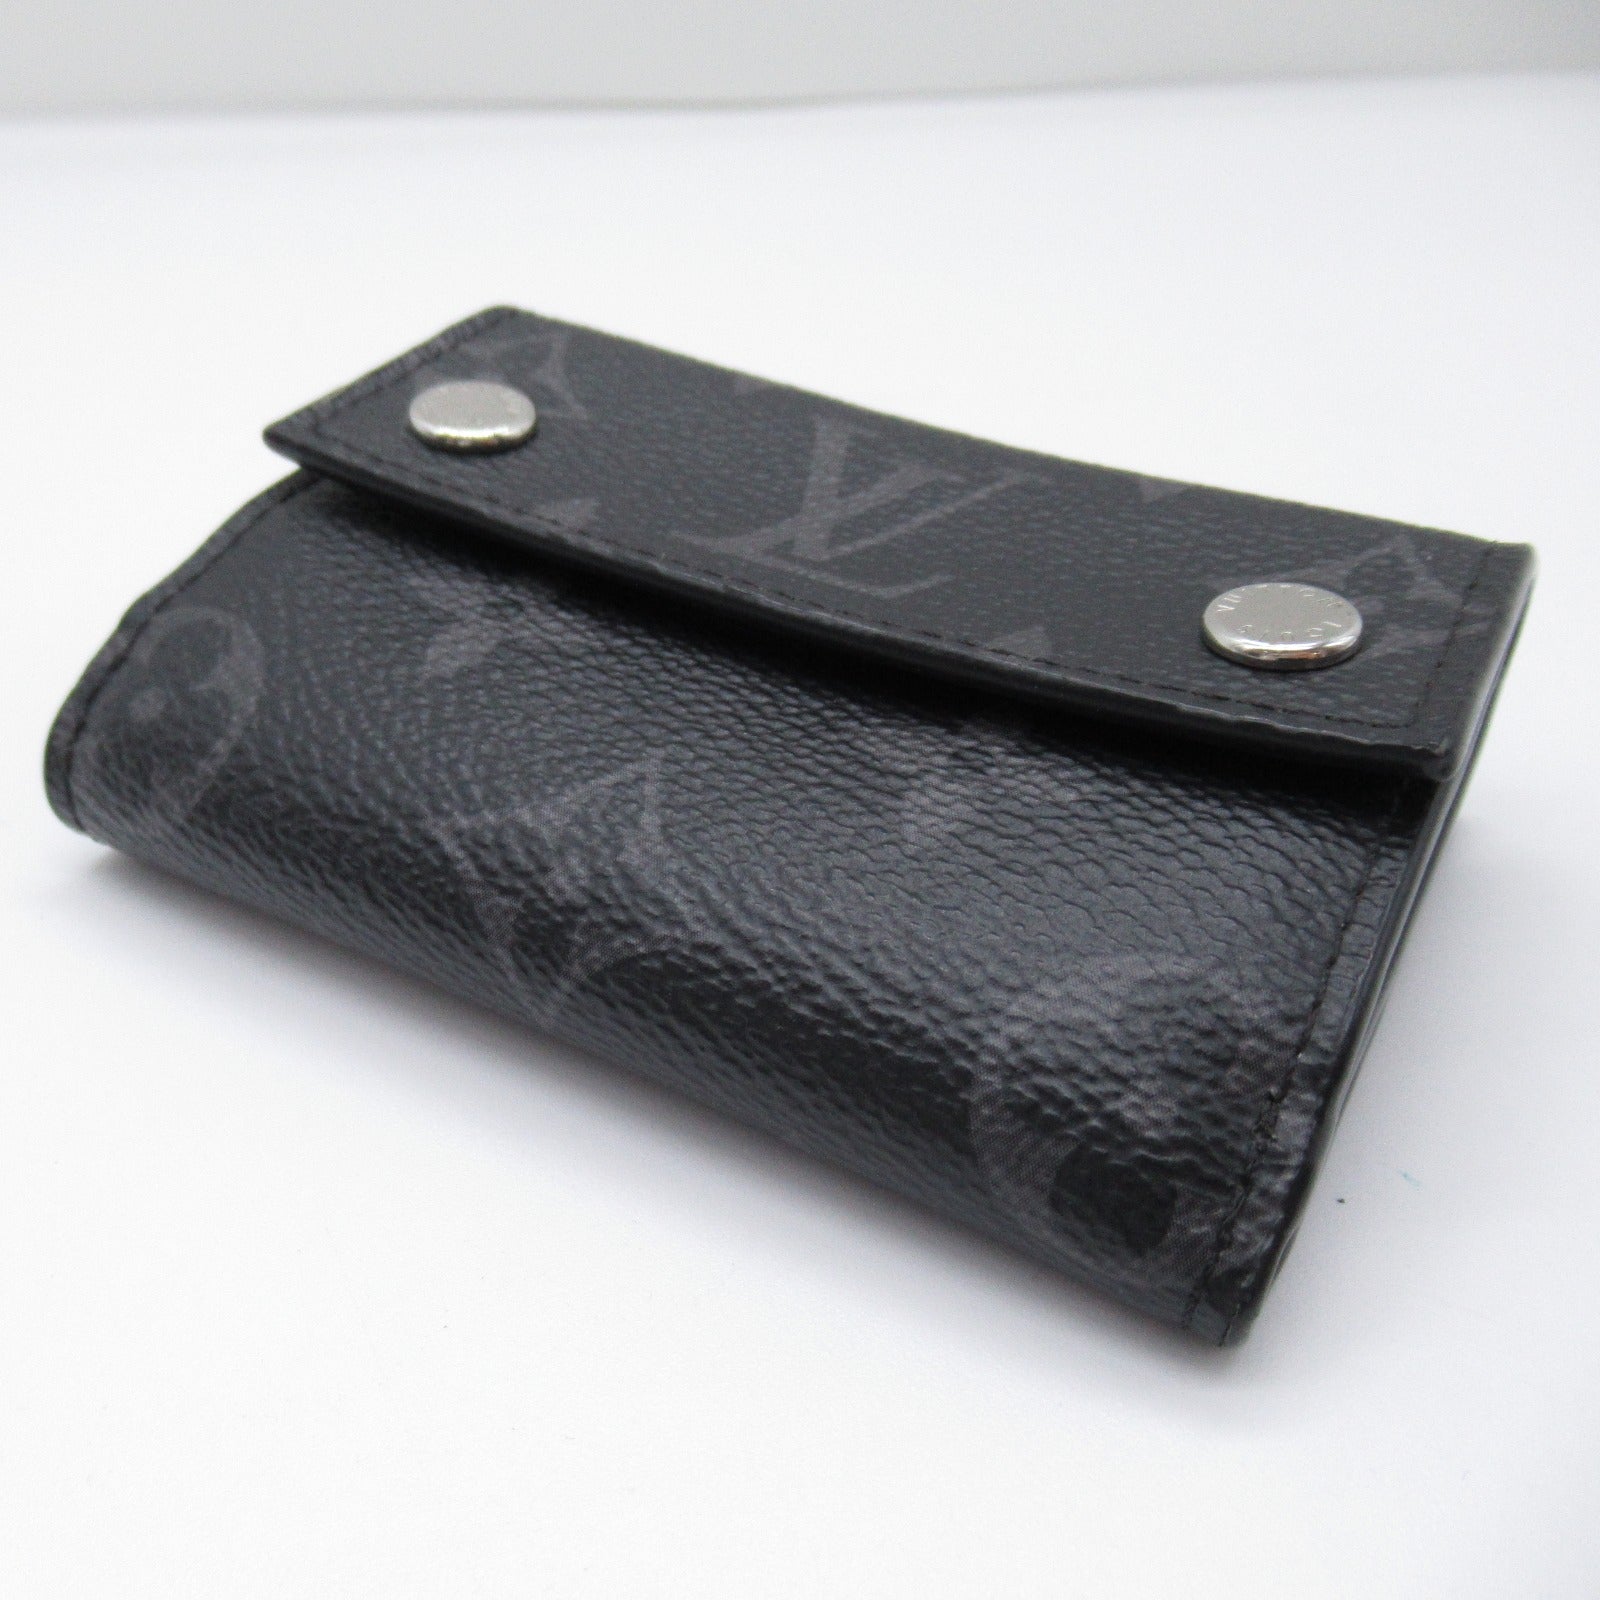 Louis Vuitton Dialovery Compact Wallet Three Fold Wallet Wallet PVC Coated Canvas Monogram Clippers   Black M67630